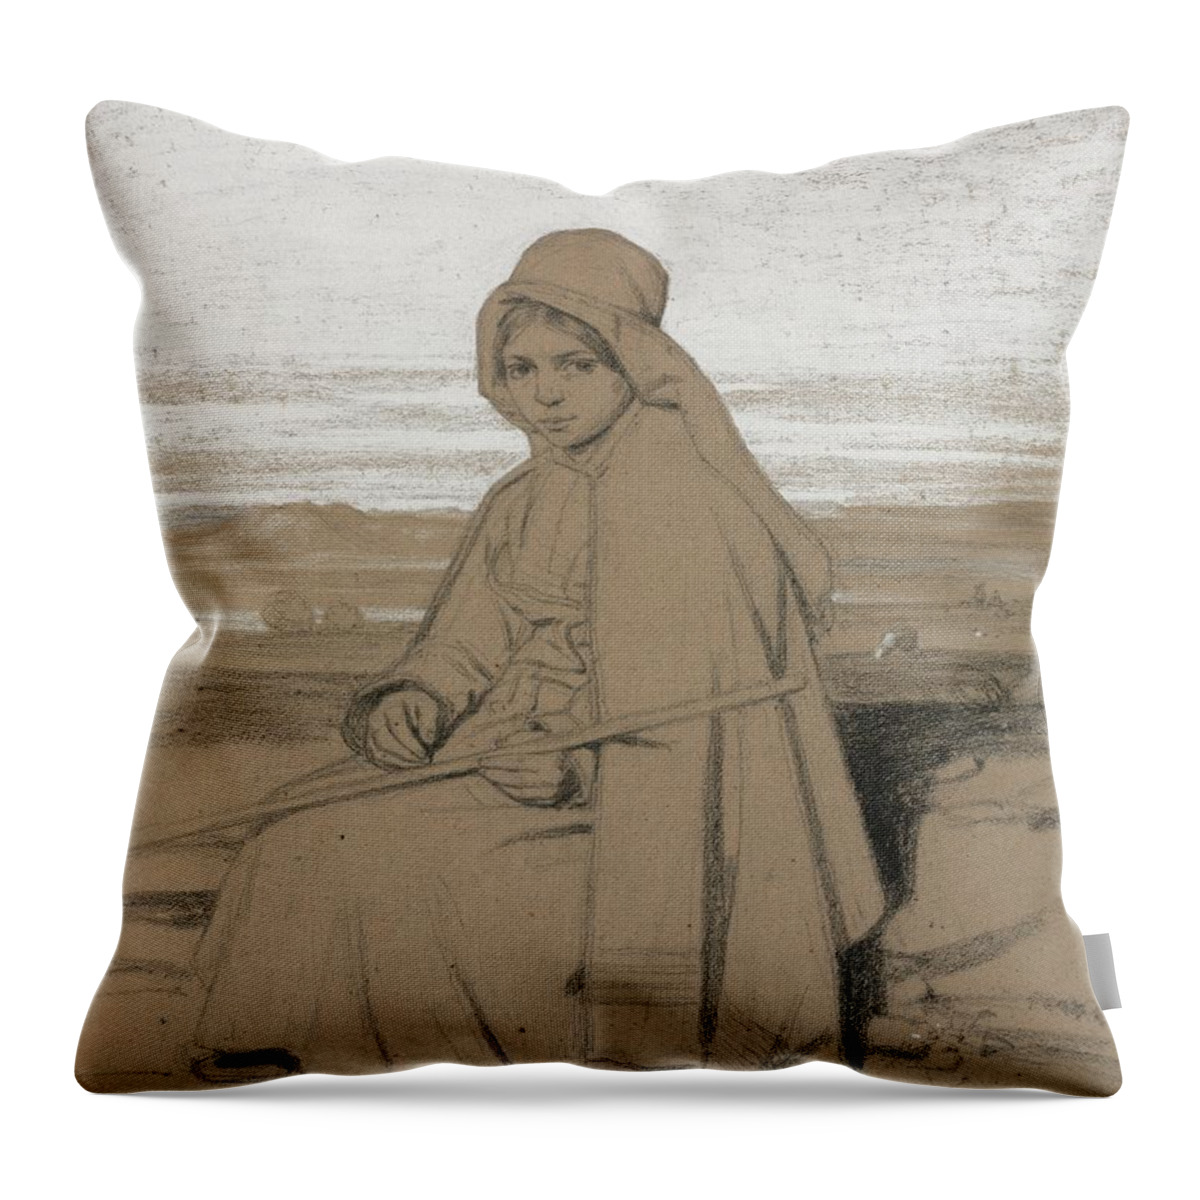 A Seated Shepherdess 1800s Jules Dupre French 1811 To 1889 Throw Pillow featuring the painting A Seated Shepherdess 1800s Jules Dupre French 1811 to 1889 by MotionAge Designs